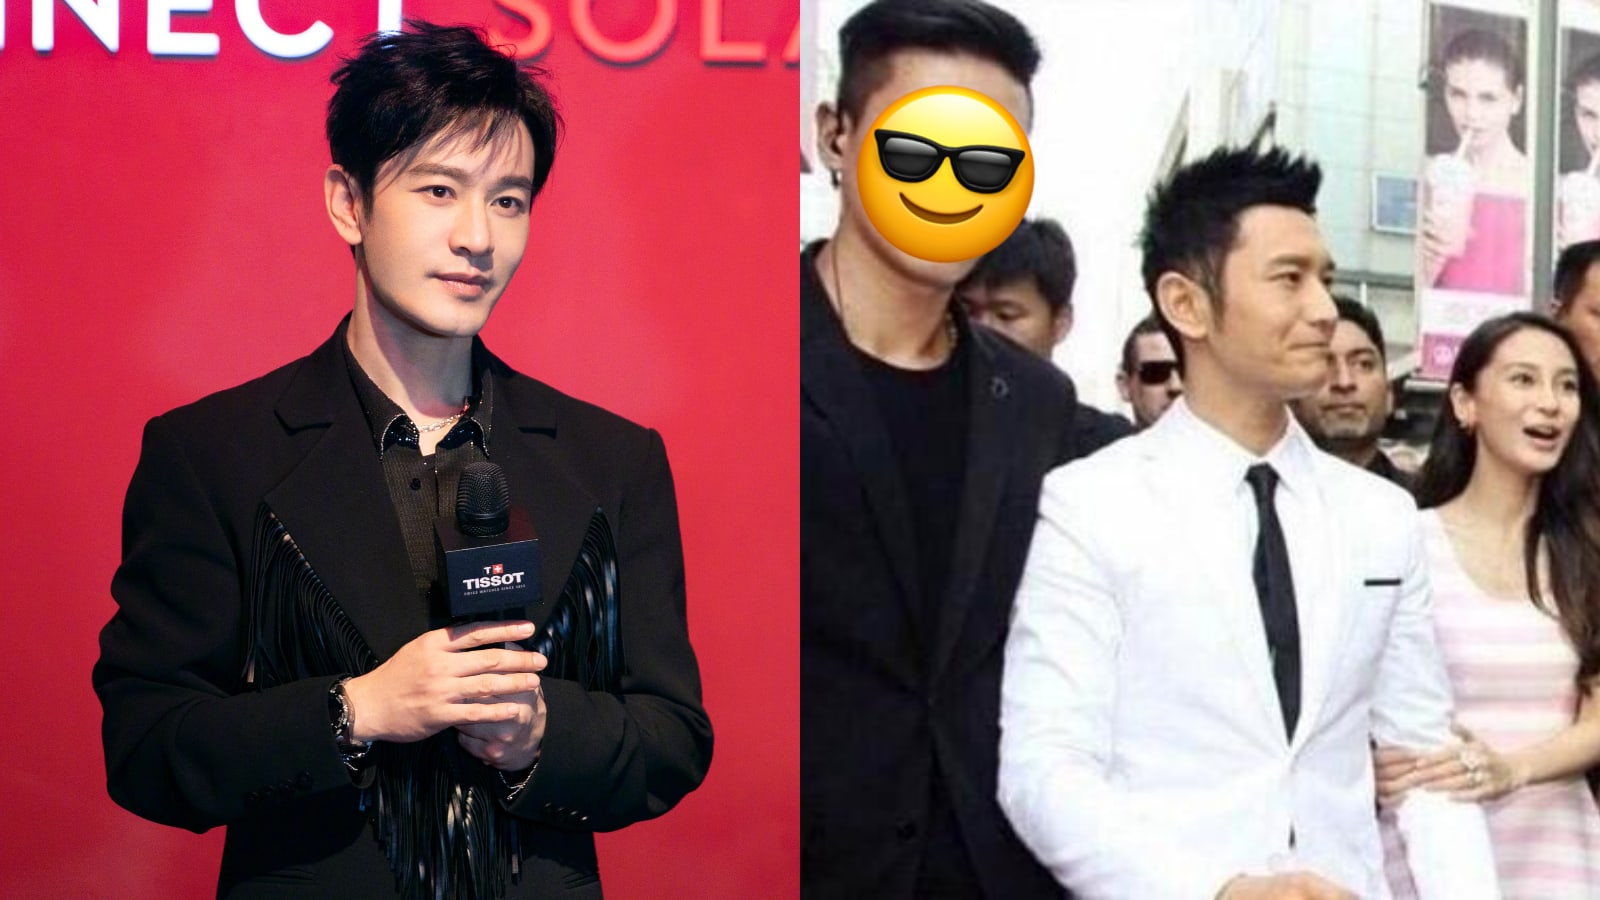 This Model-Turned-Bodyguard Once Made Headlines For Being “More Handsome Than Huang Xiaoming”